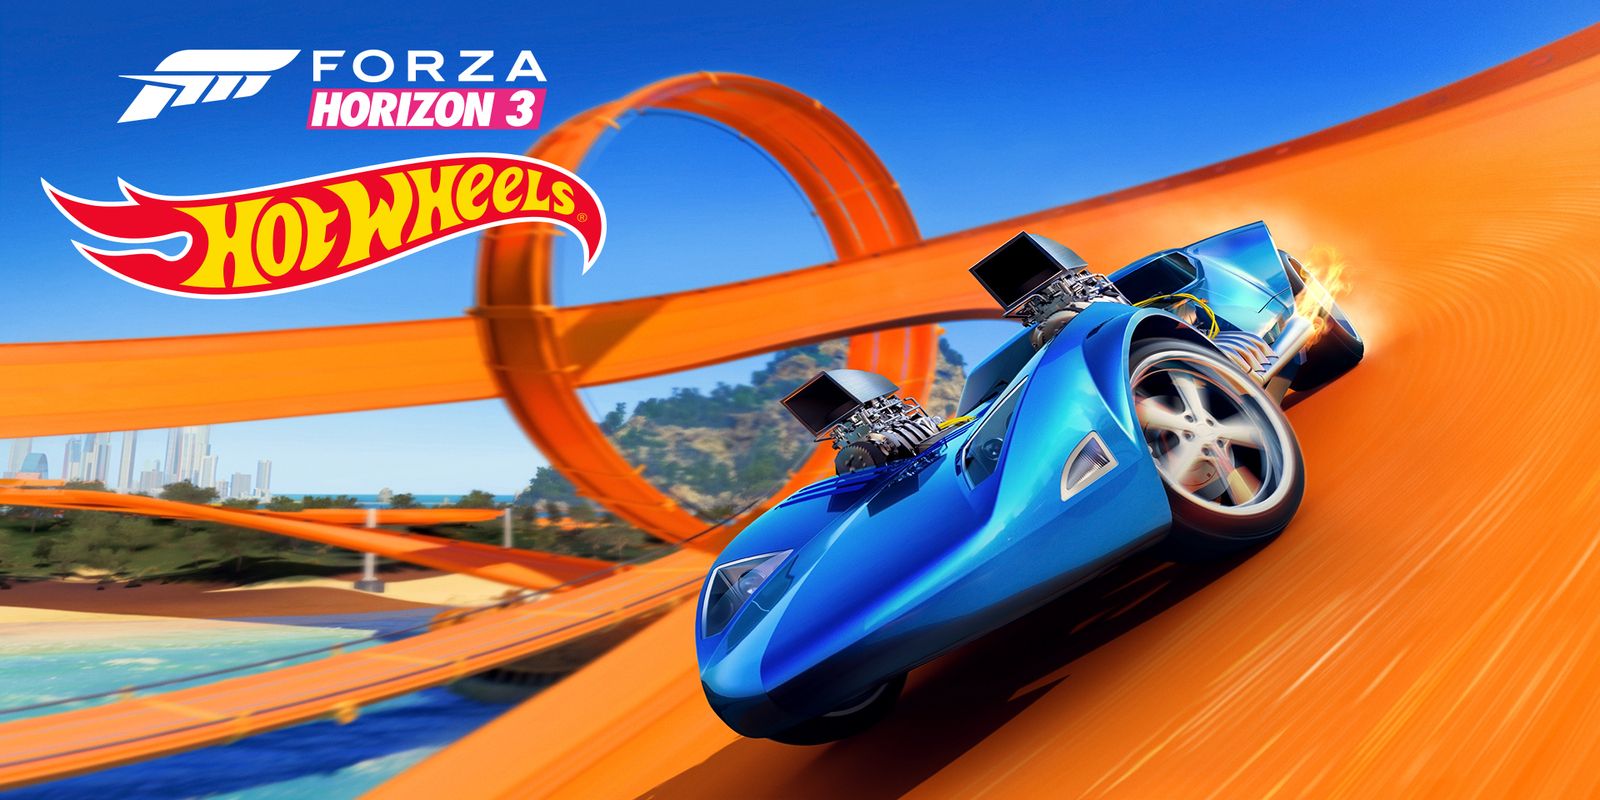 Title art for Forza Horizon 3: Hot Wheels with car on a ramp